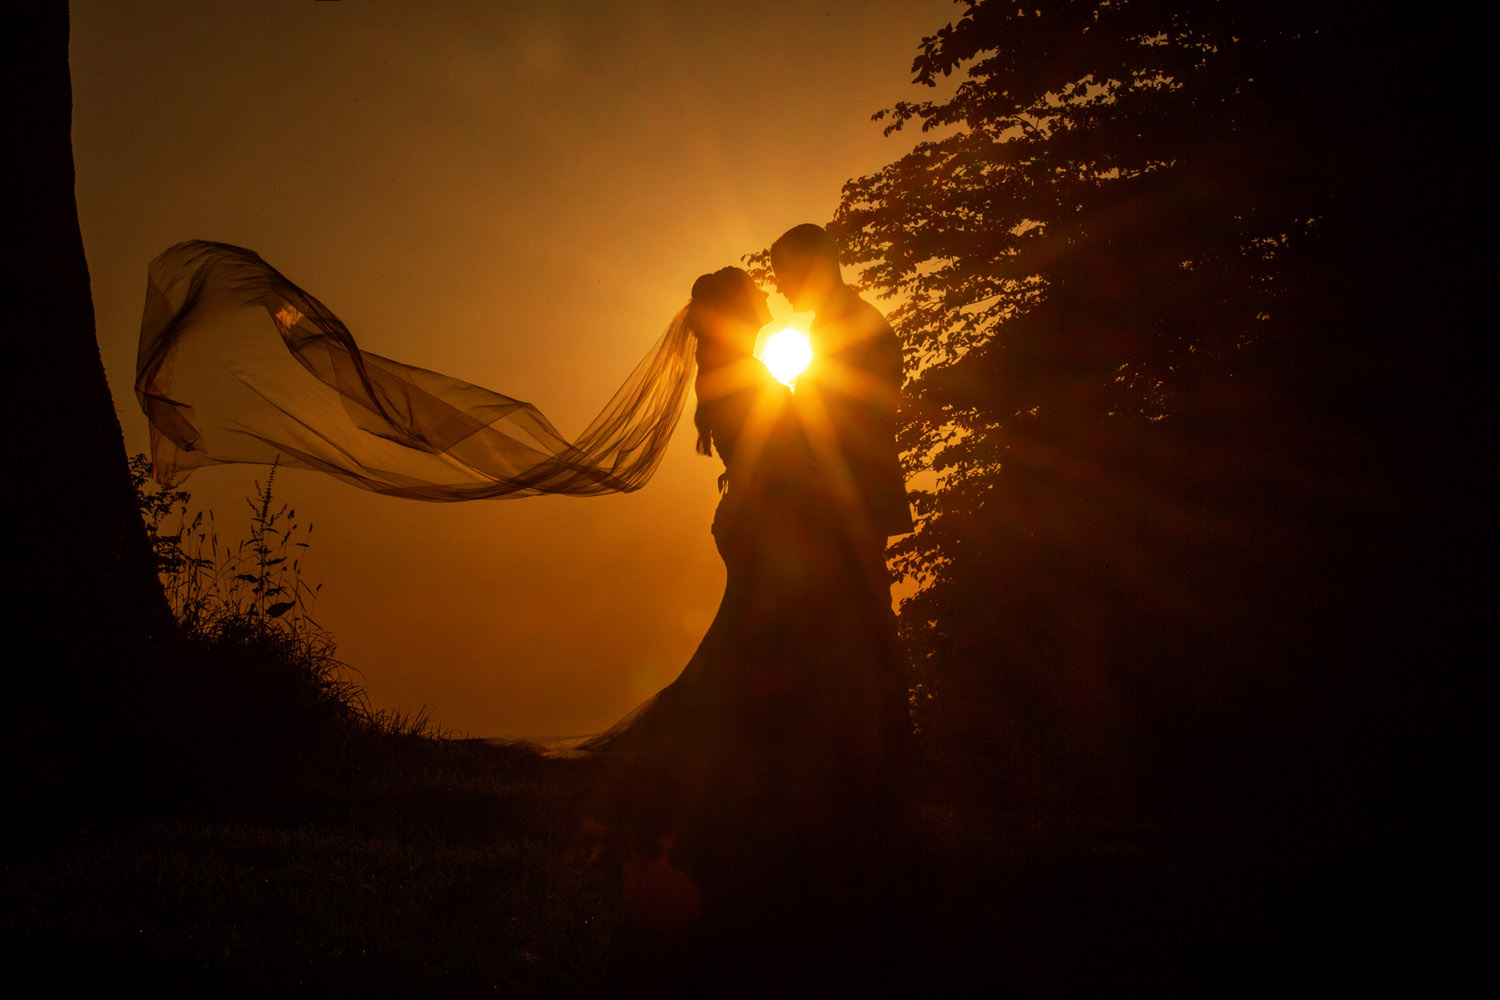 Beautiful sunset wedding photograph, with the sun flare between the couple. Captured by Martin Dabek Photography in B